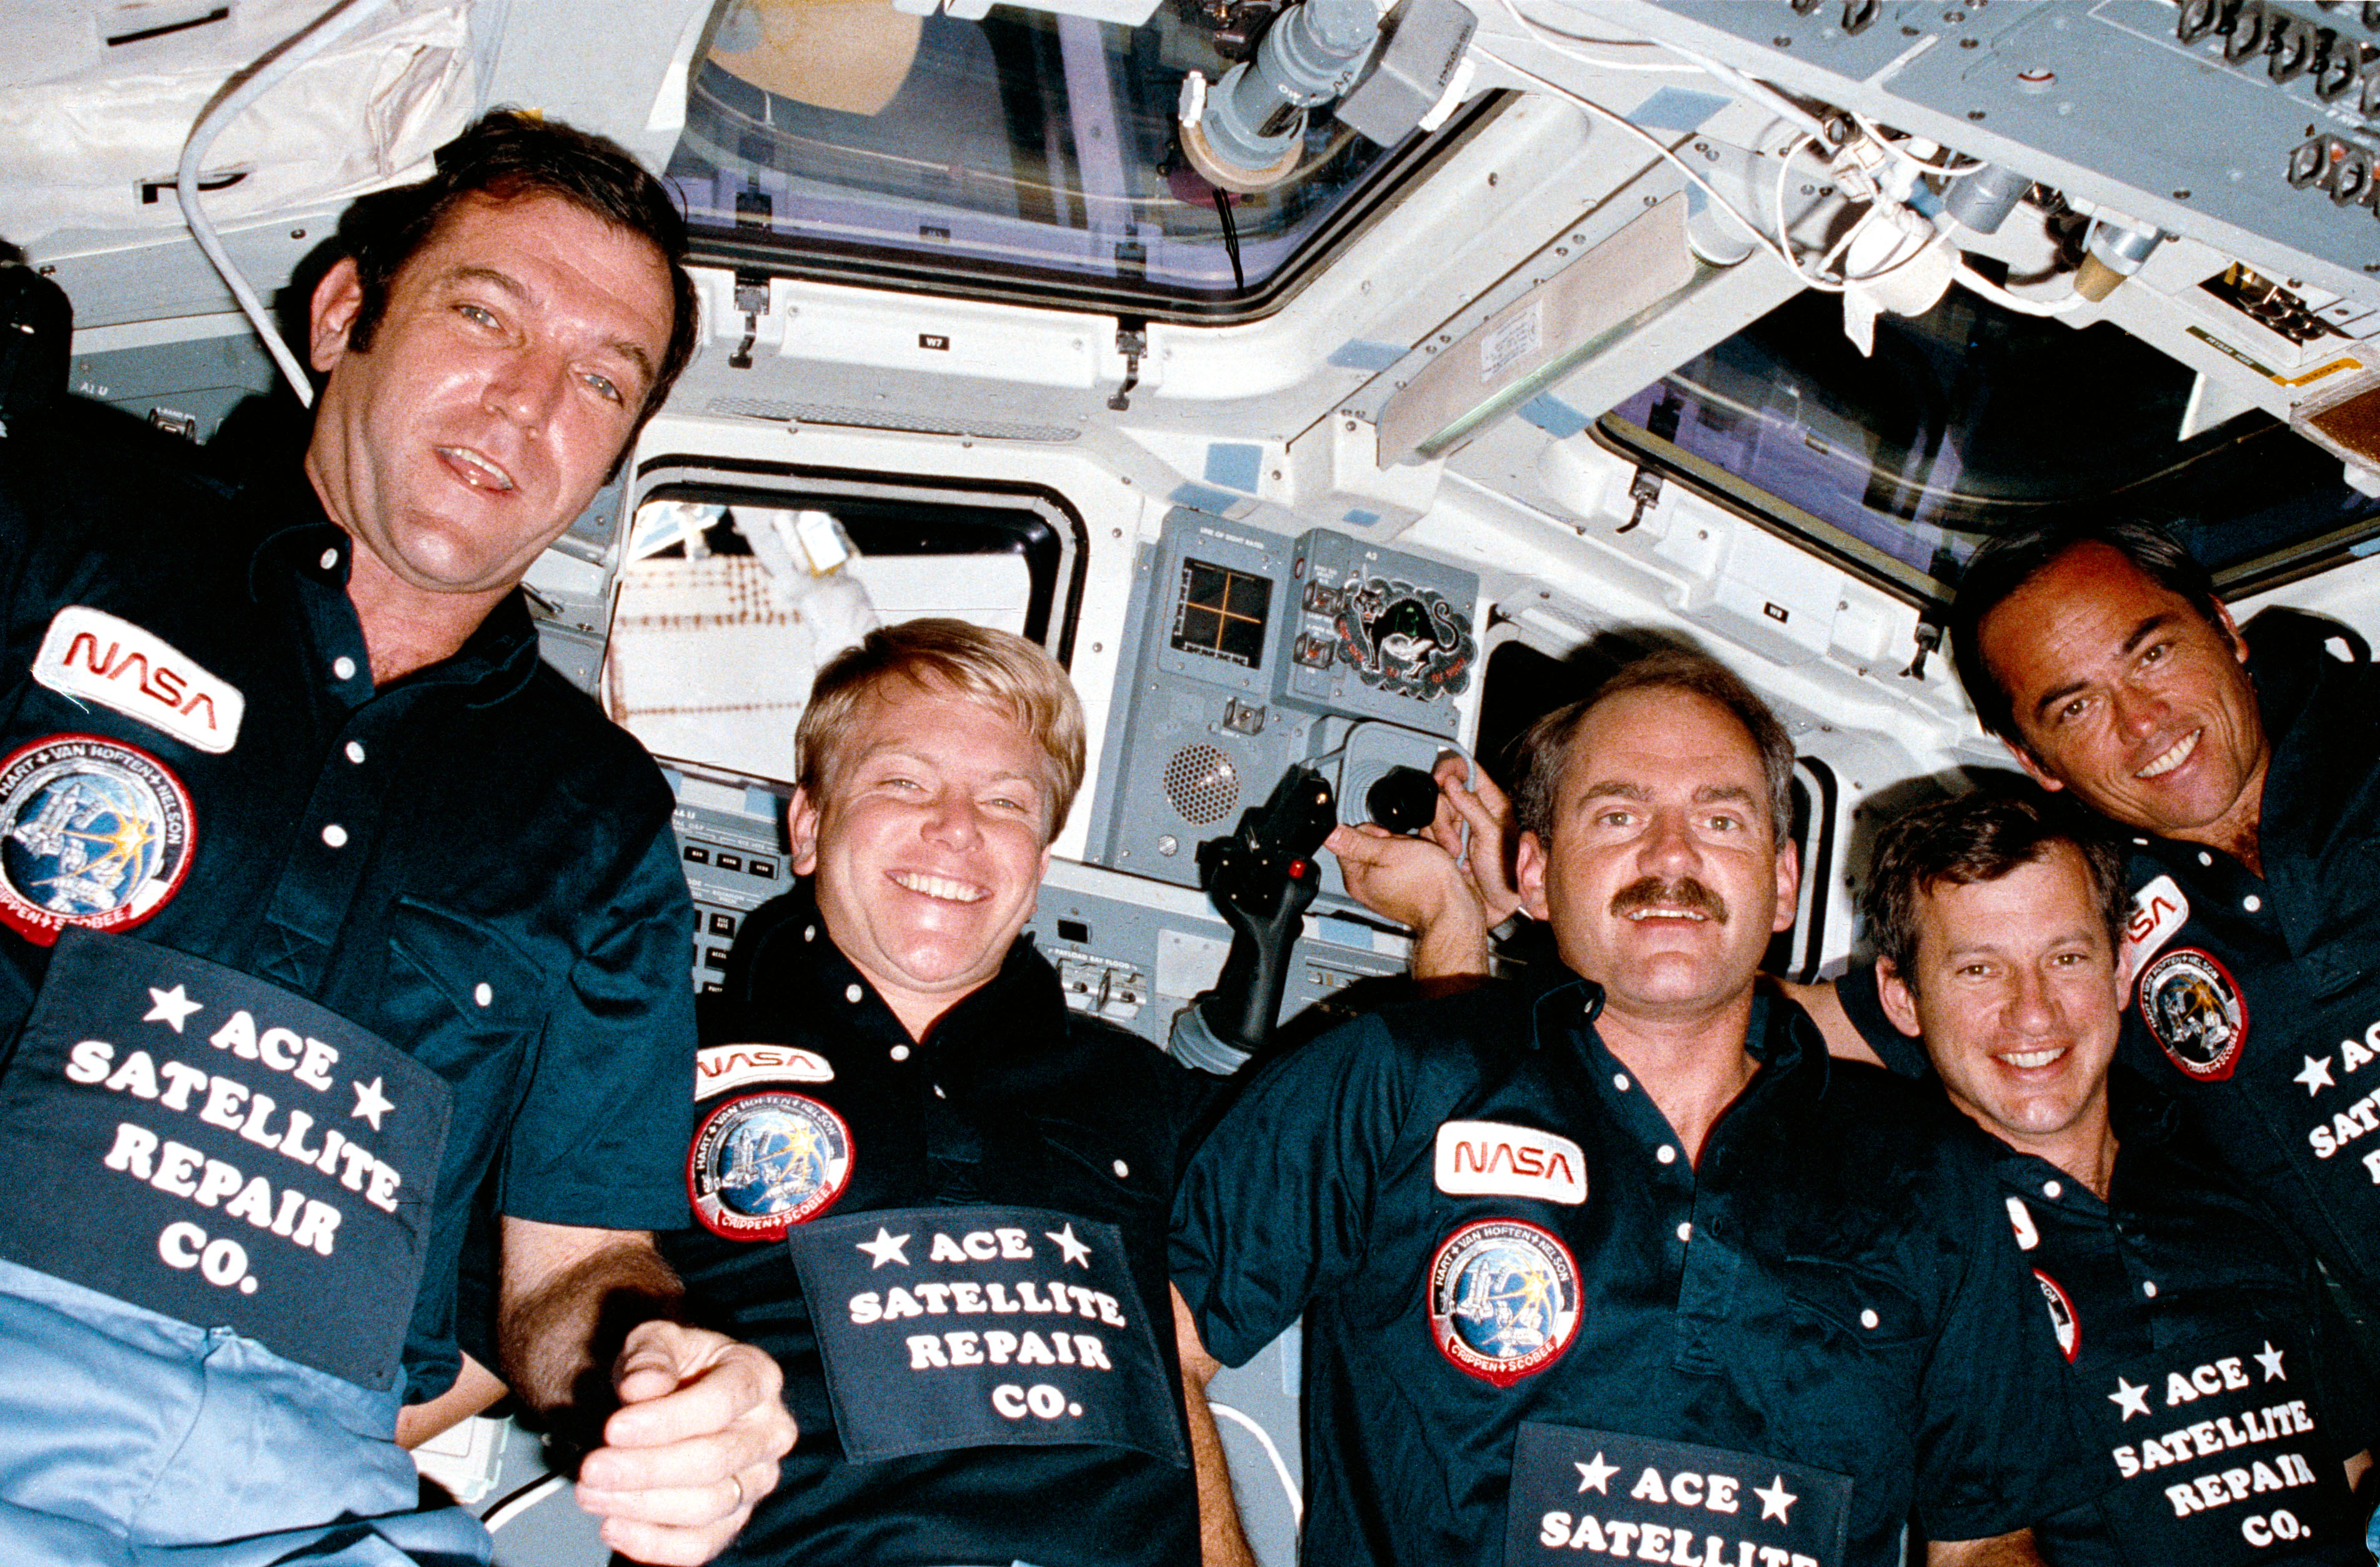 The STS-41C crew members pose on Challenger’s flight deck near the end of their successful mission, wearing customized shirts